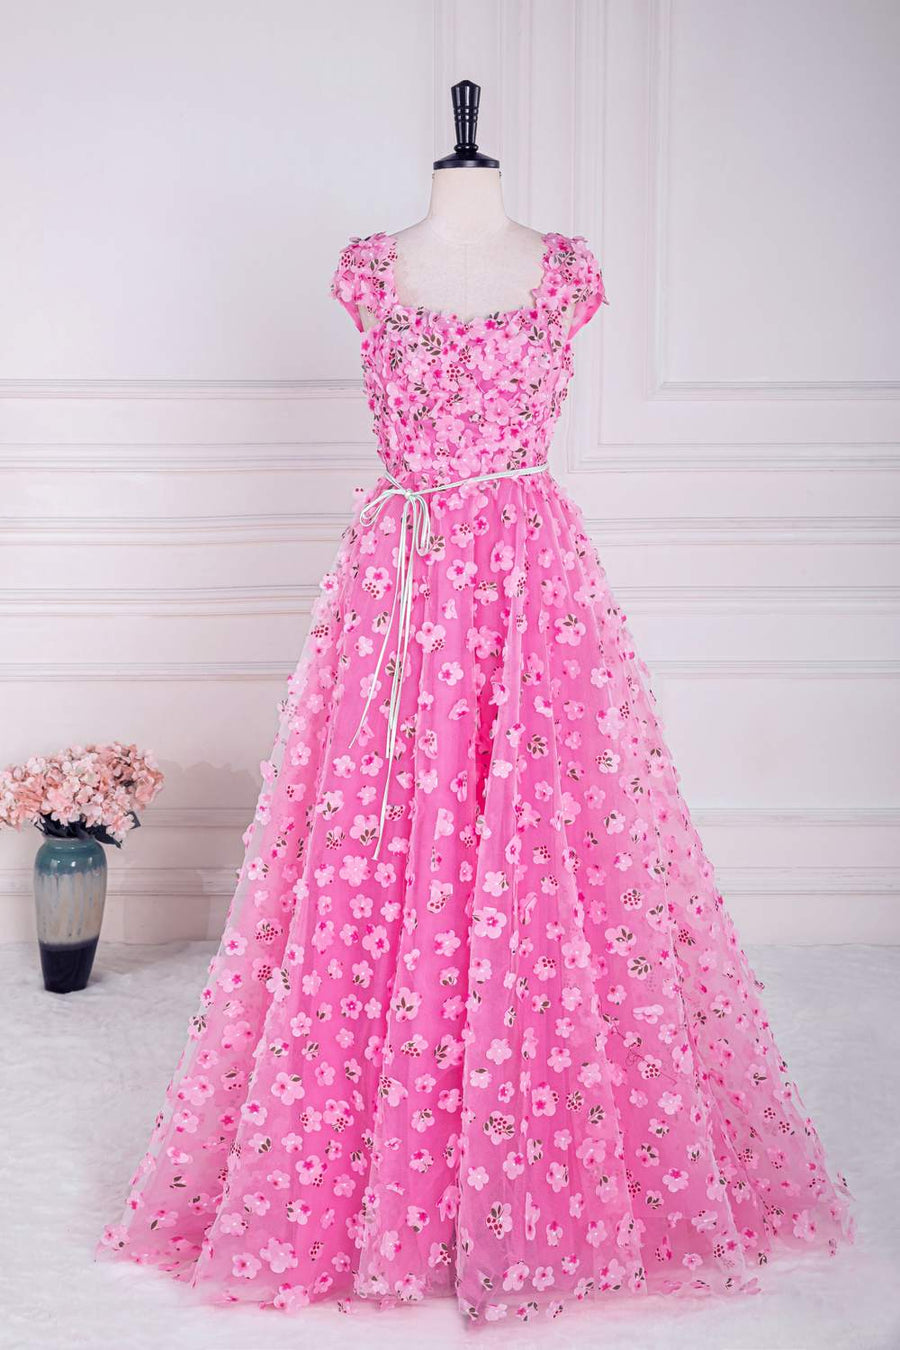 Pink 3D Floral A-line Cap Sleeves Long Prom Dress with Sash